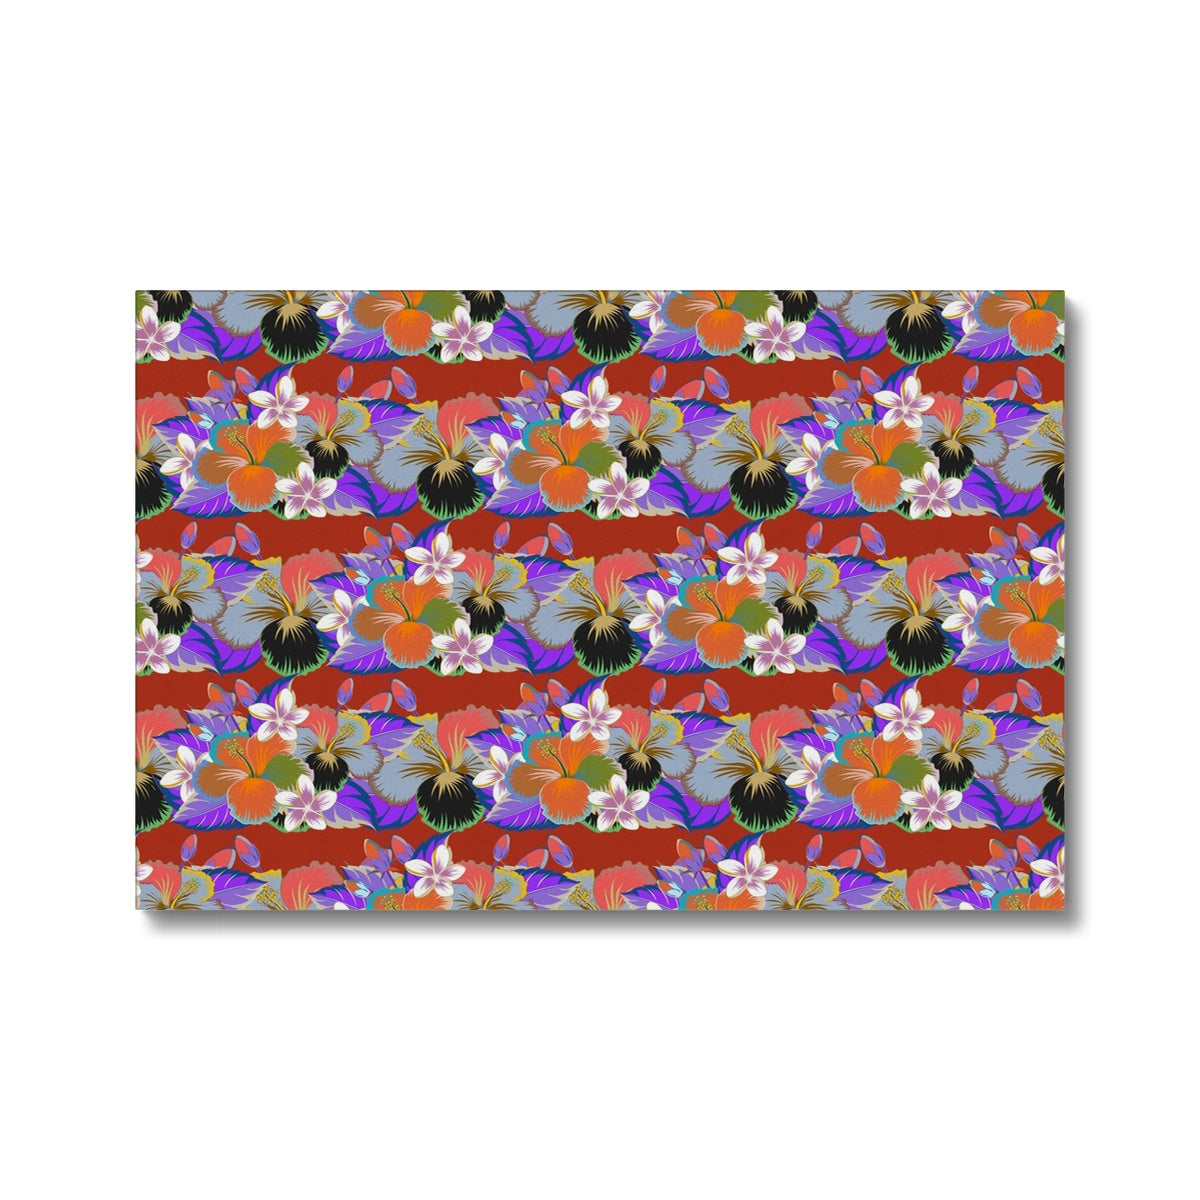 Abstract Lily Flowers Art Canvas